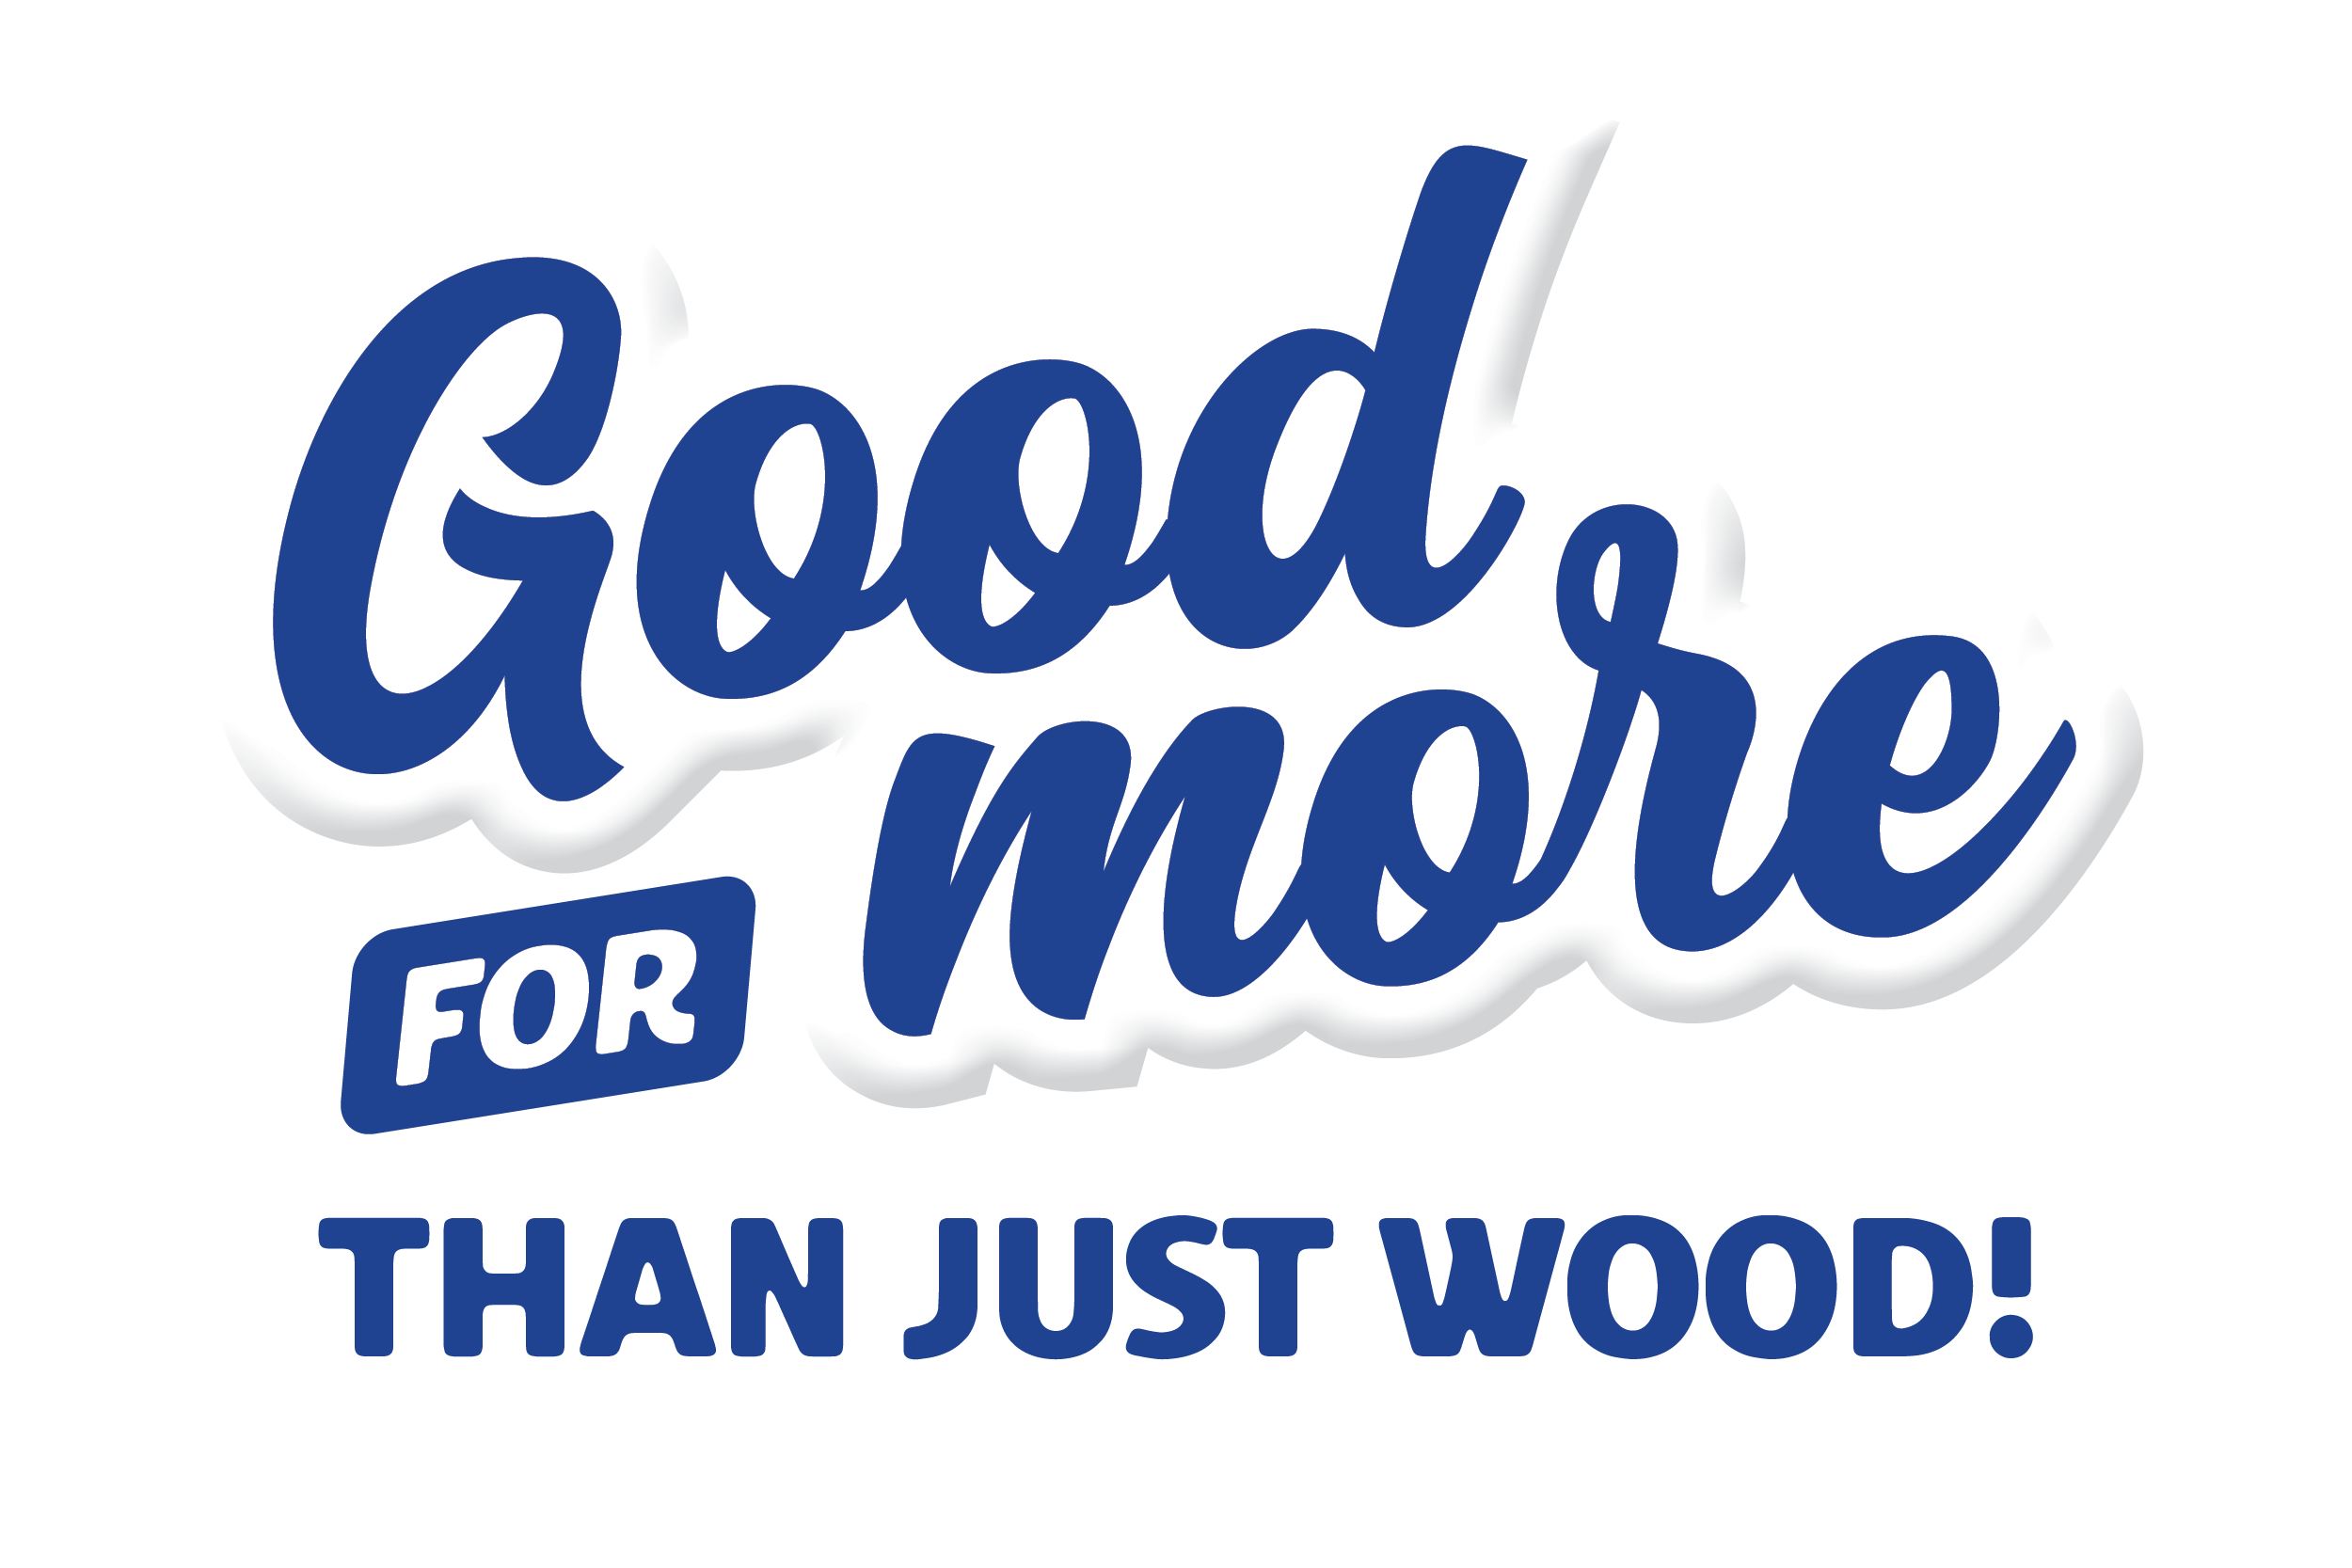 Good for more than just wood!